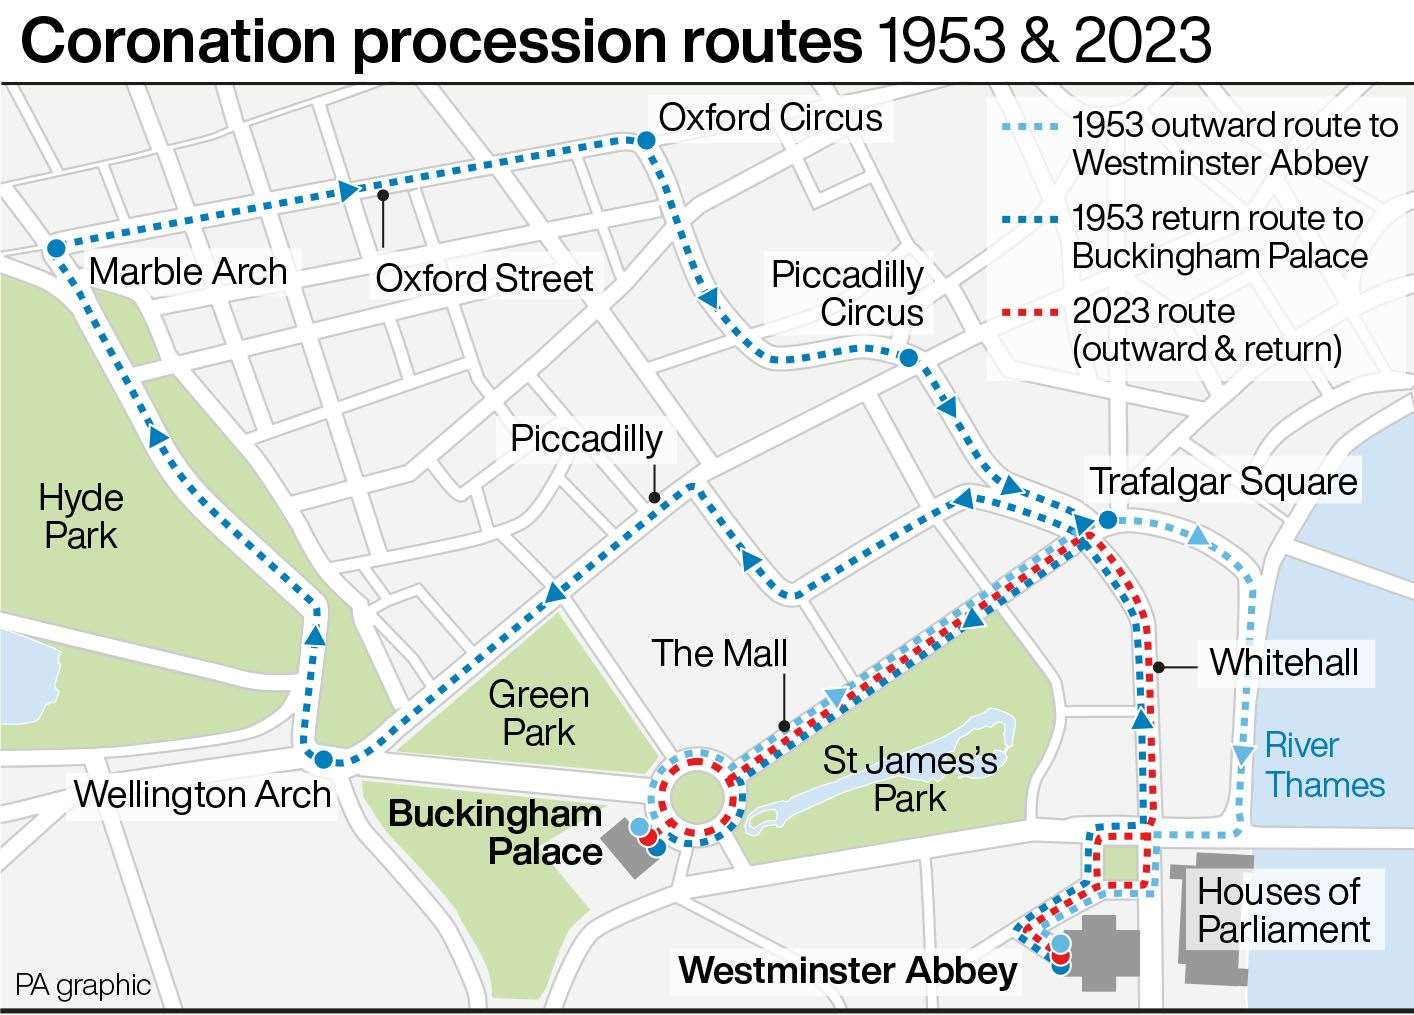 The coronation routes in 1953 and 2023 (PA)